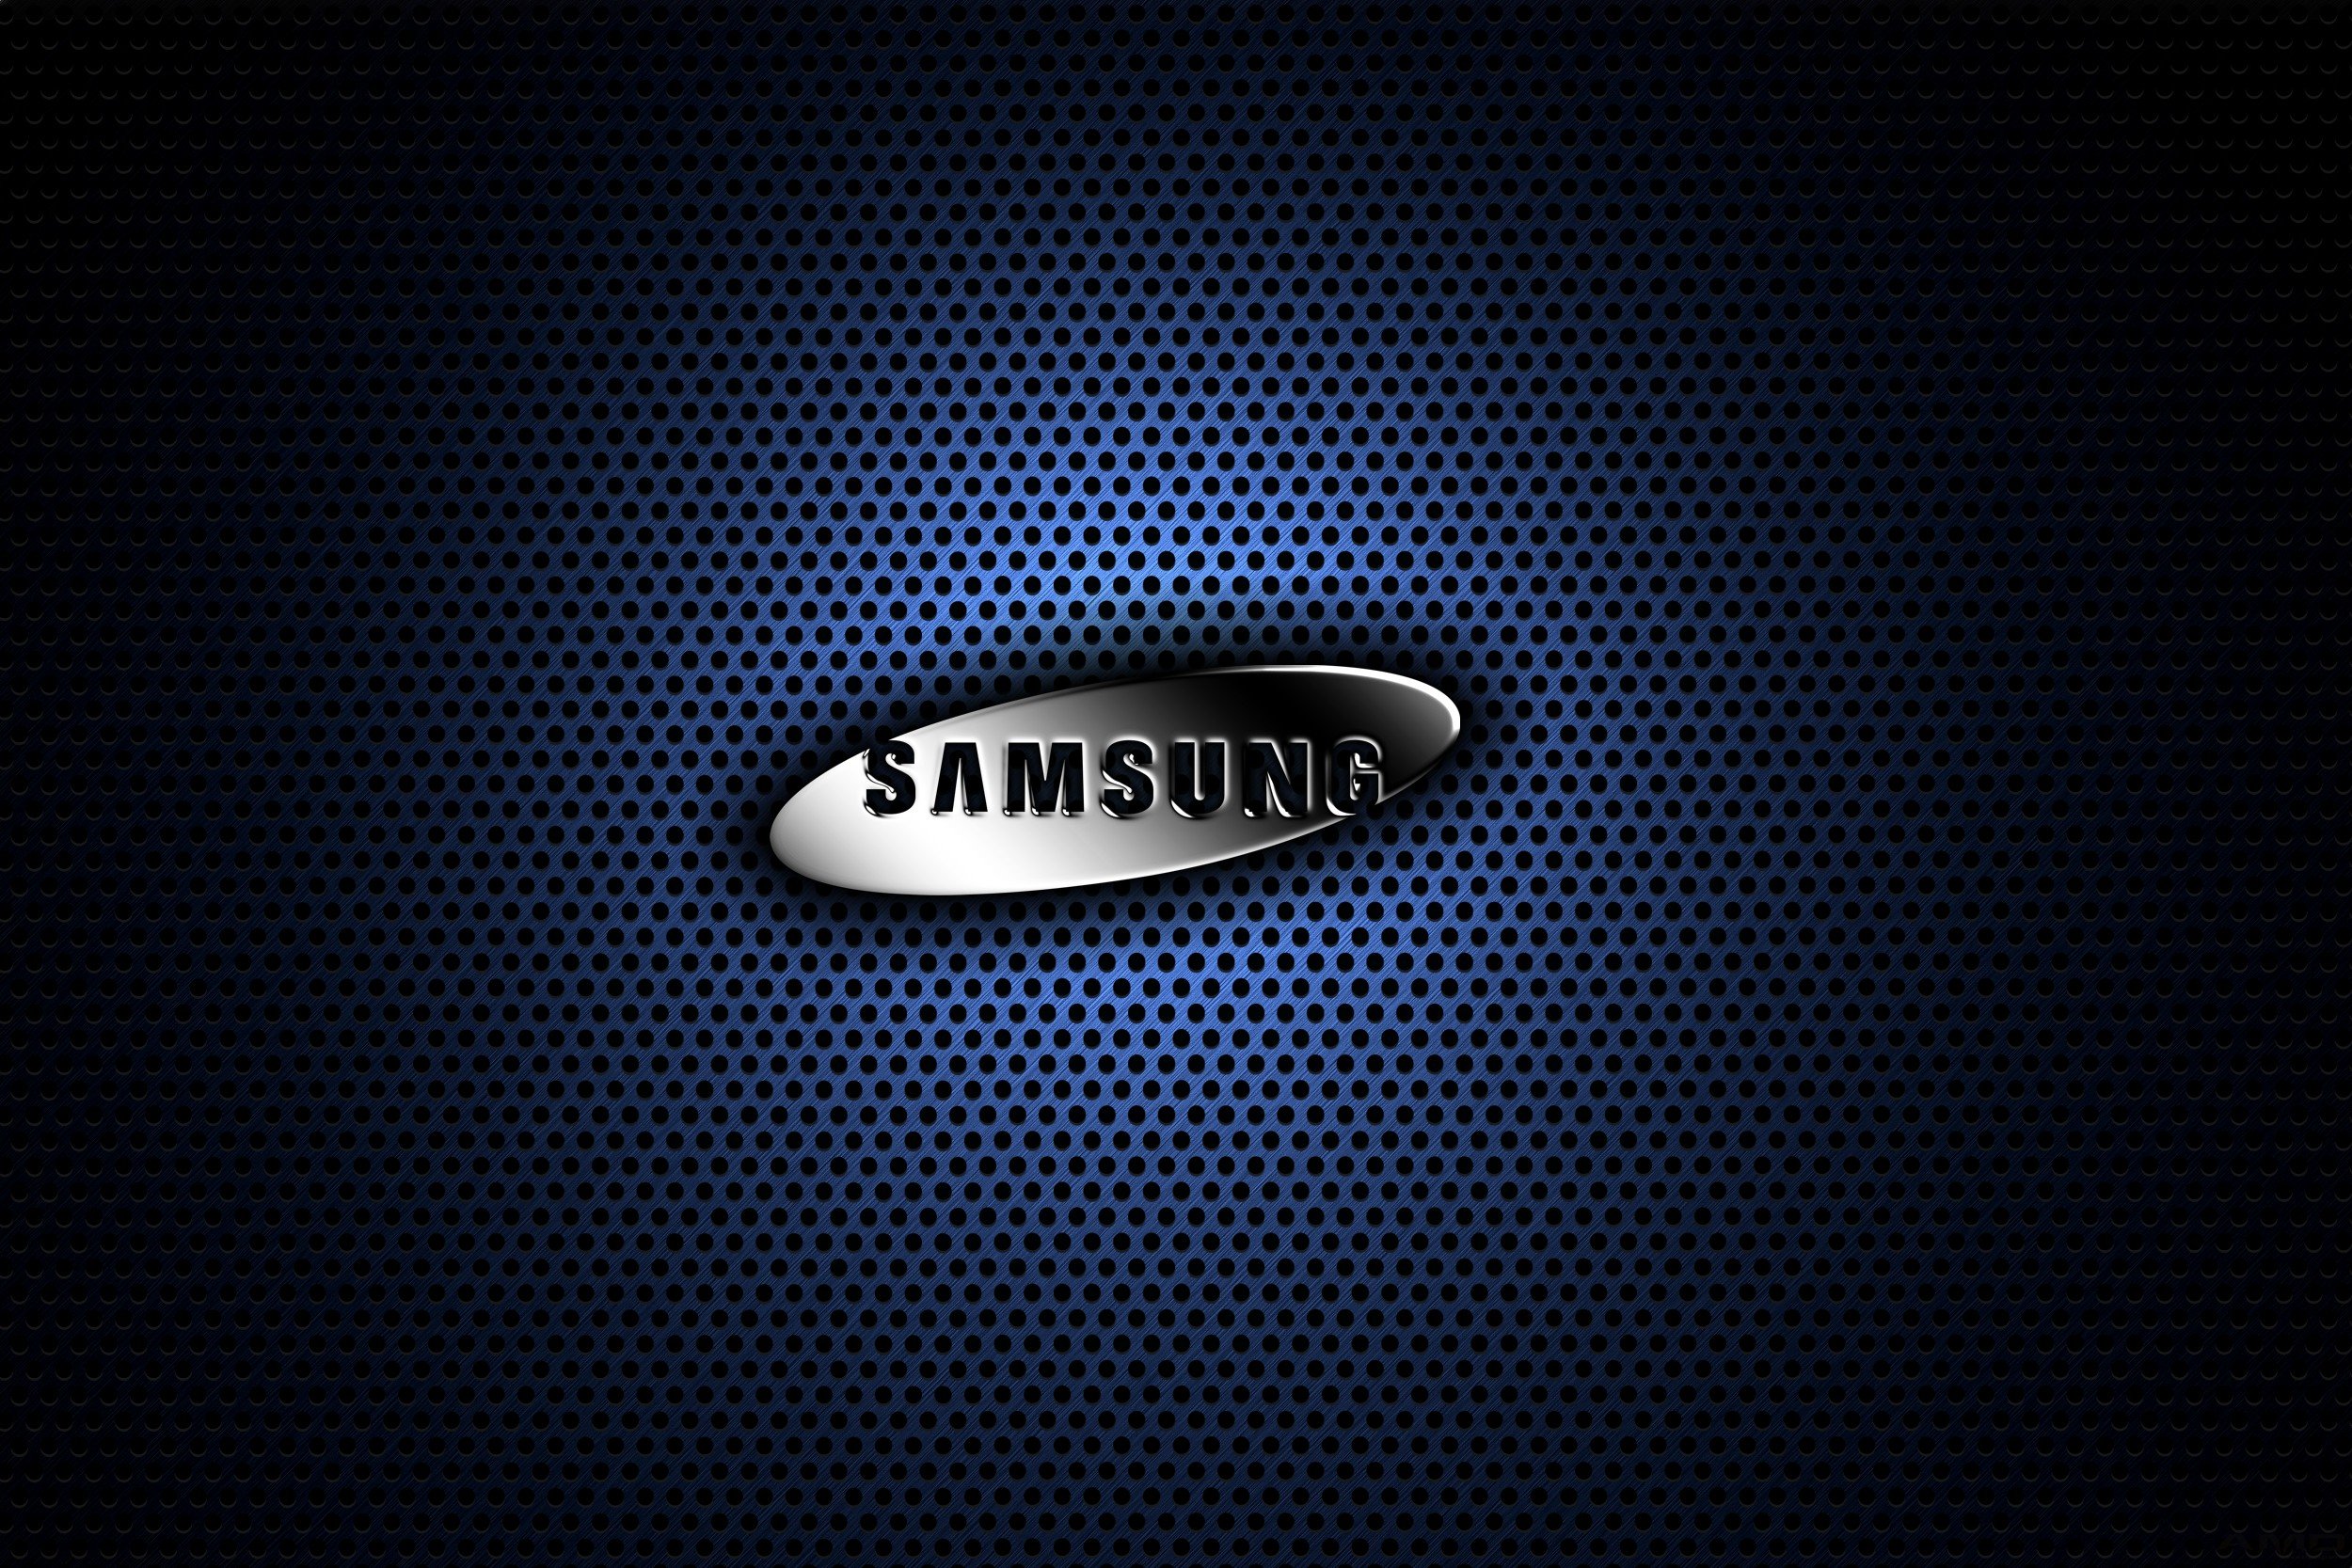 40+] Samsung HD Wallpapers 1080p on